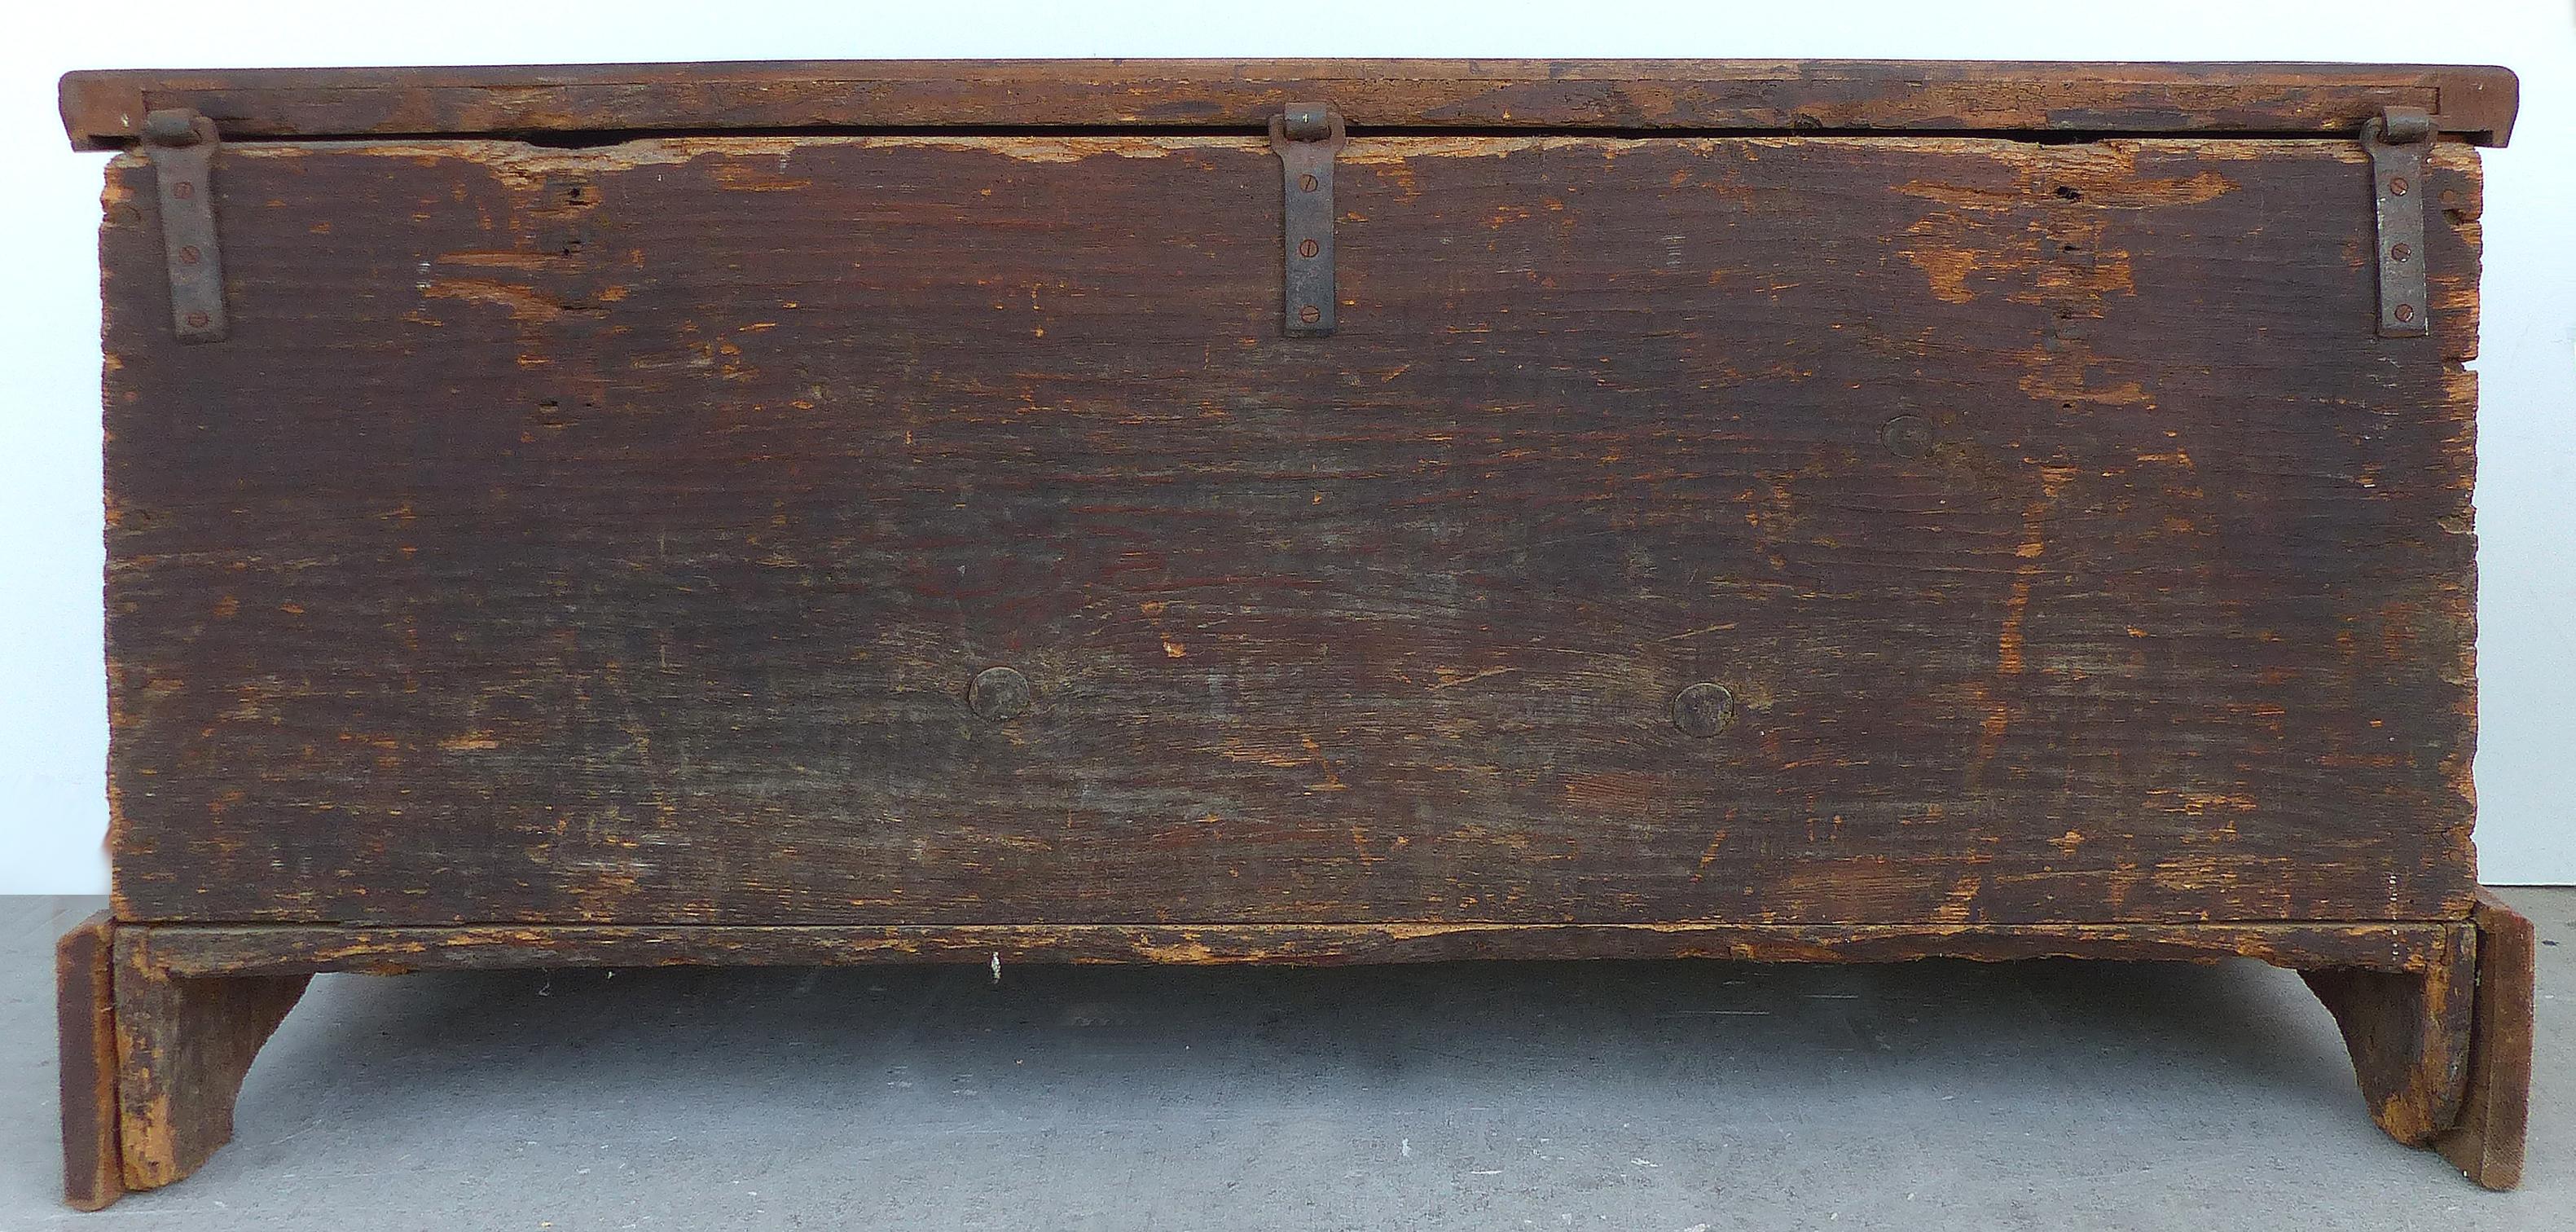 Late 18th Century Hand Painted Bavarian Dowry Chest Dated 1767 For Sale 4